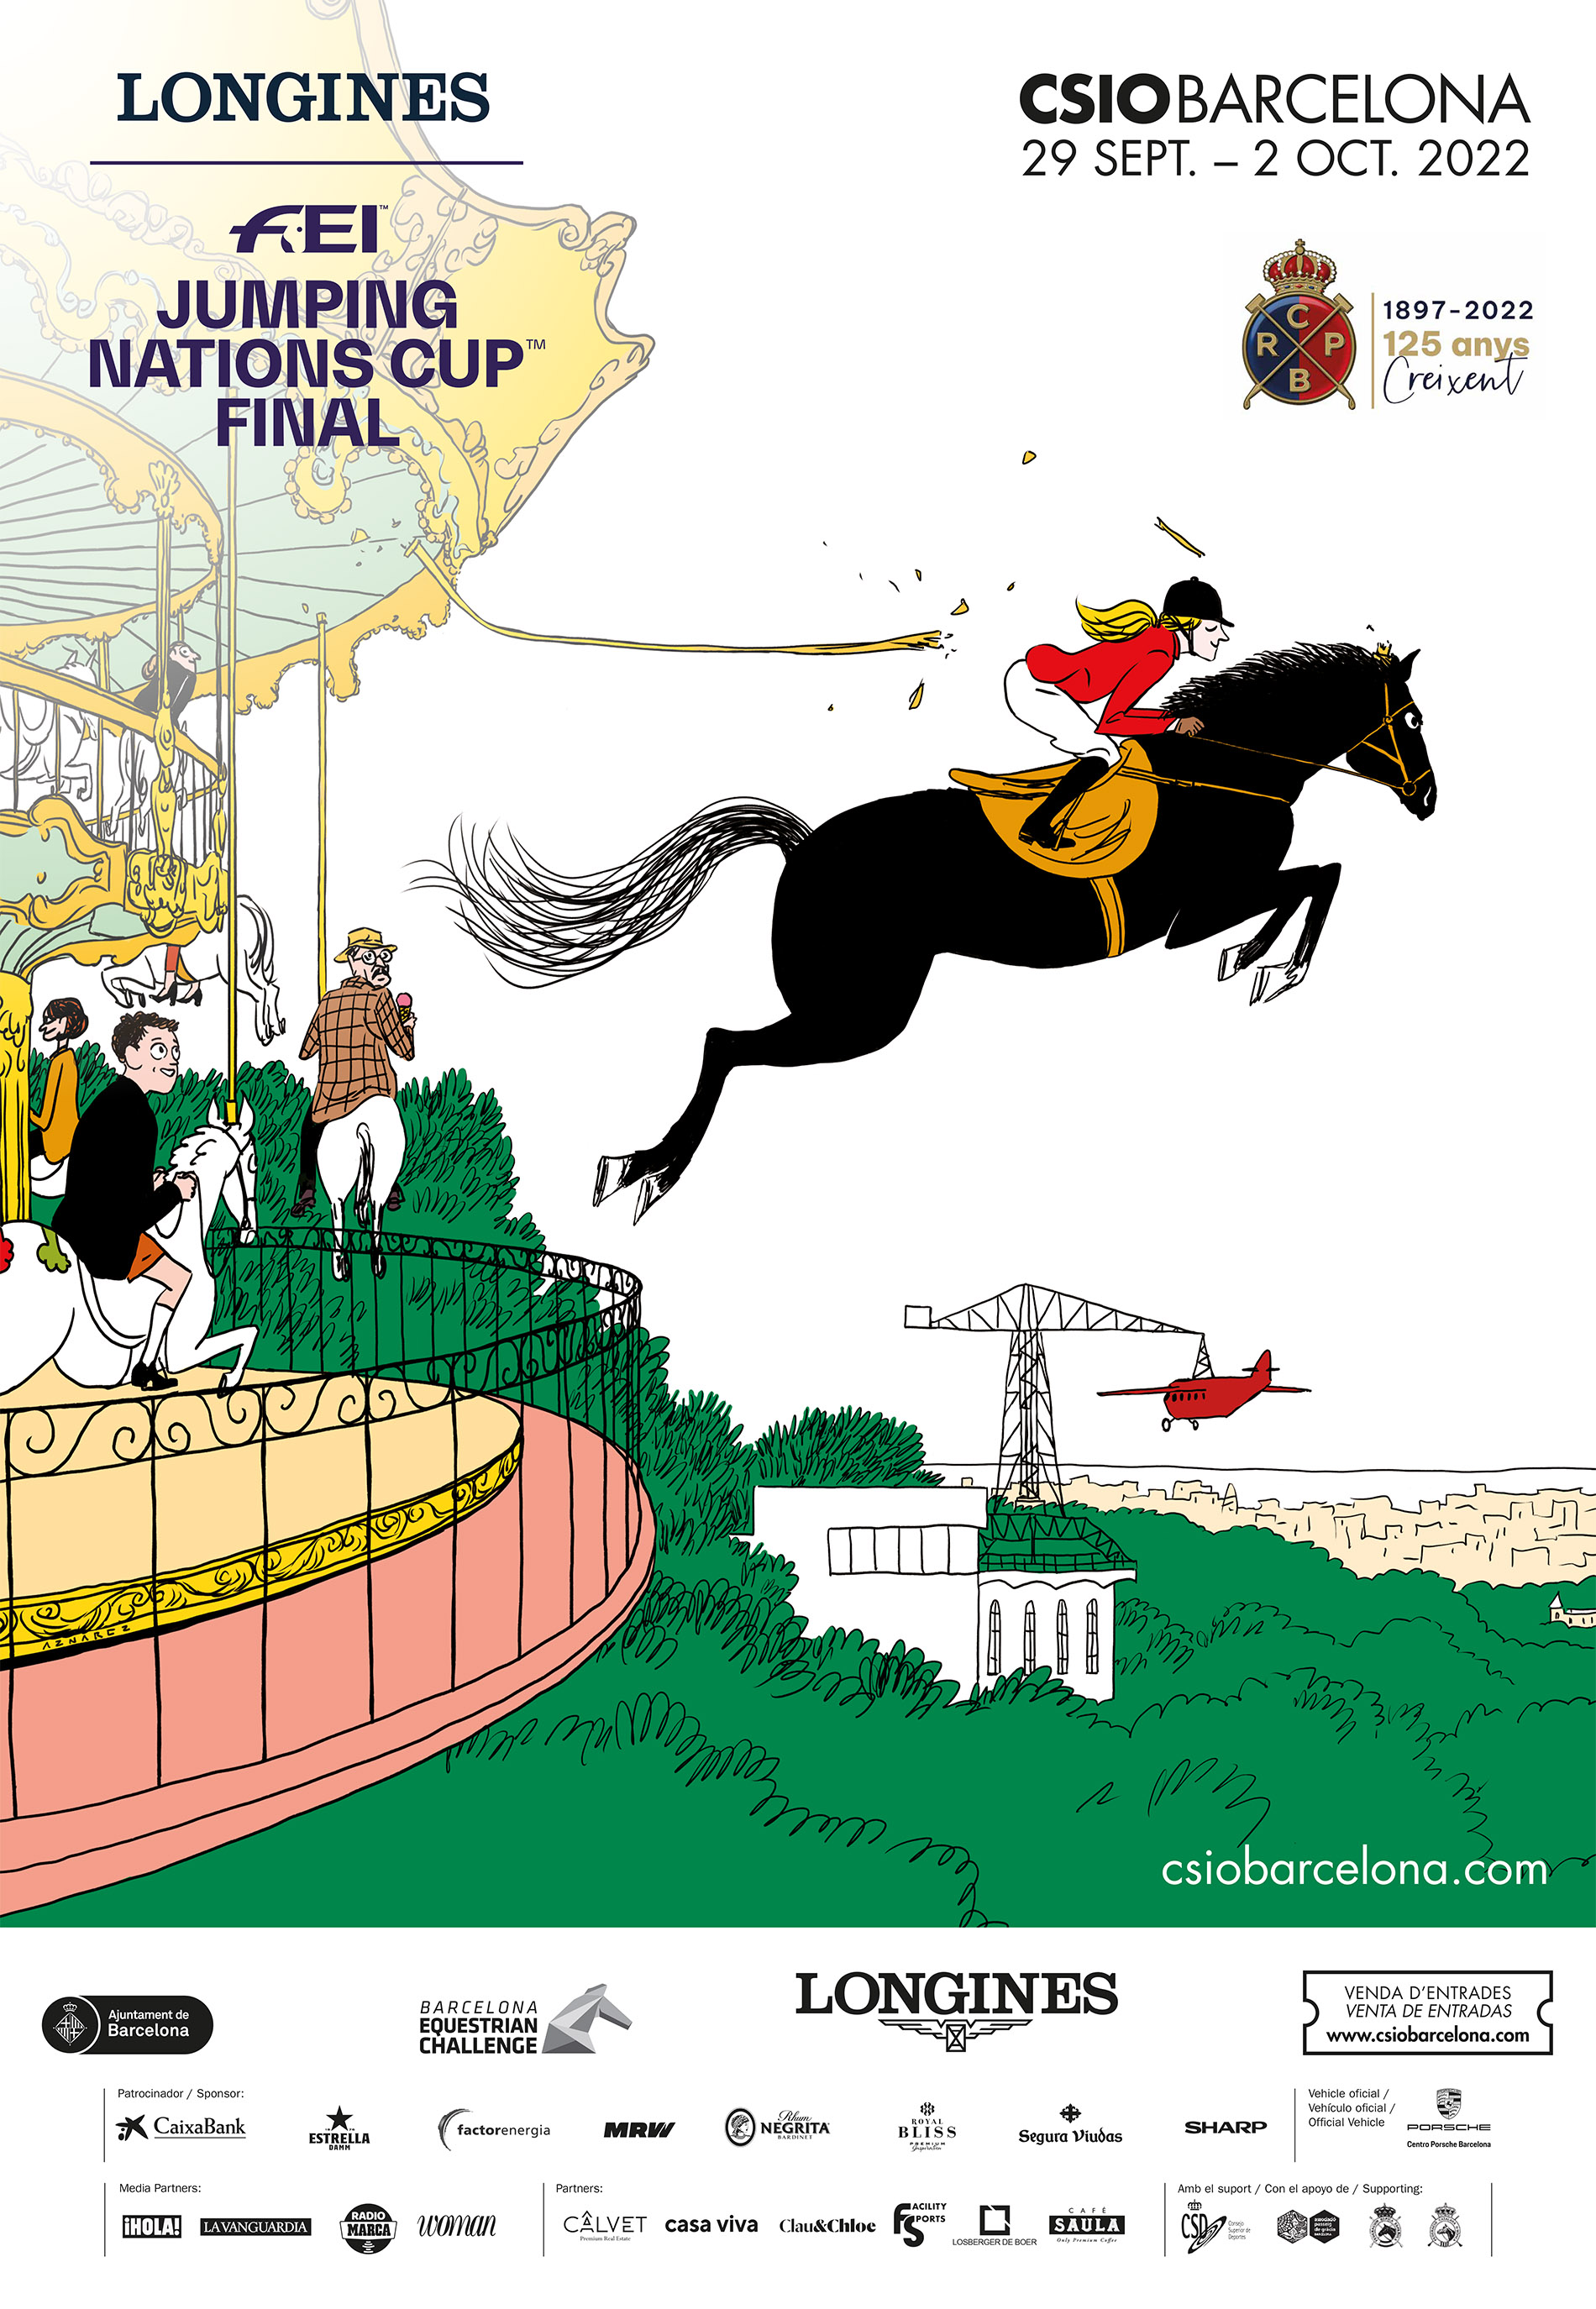 The Tibidabo carousel stars in the poster for the CSIO Barcelona 2022